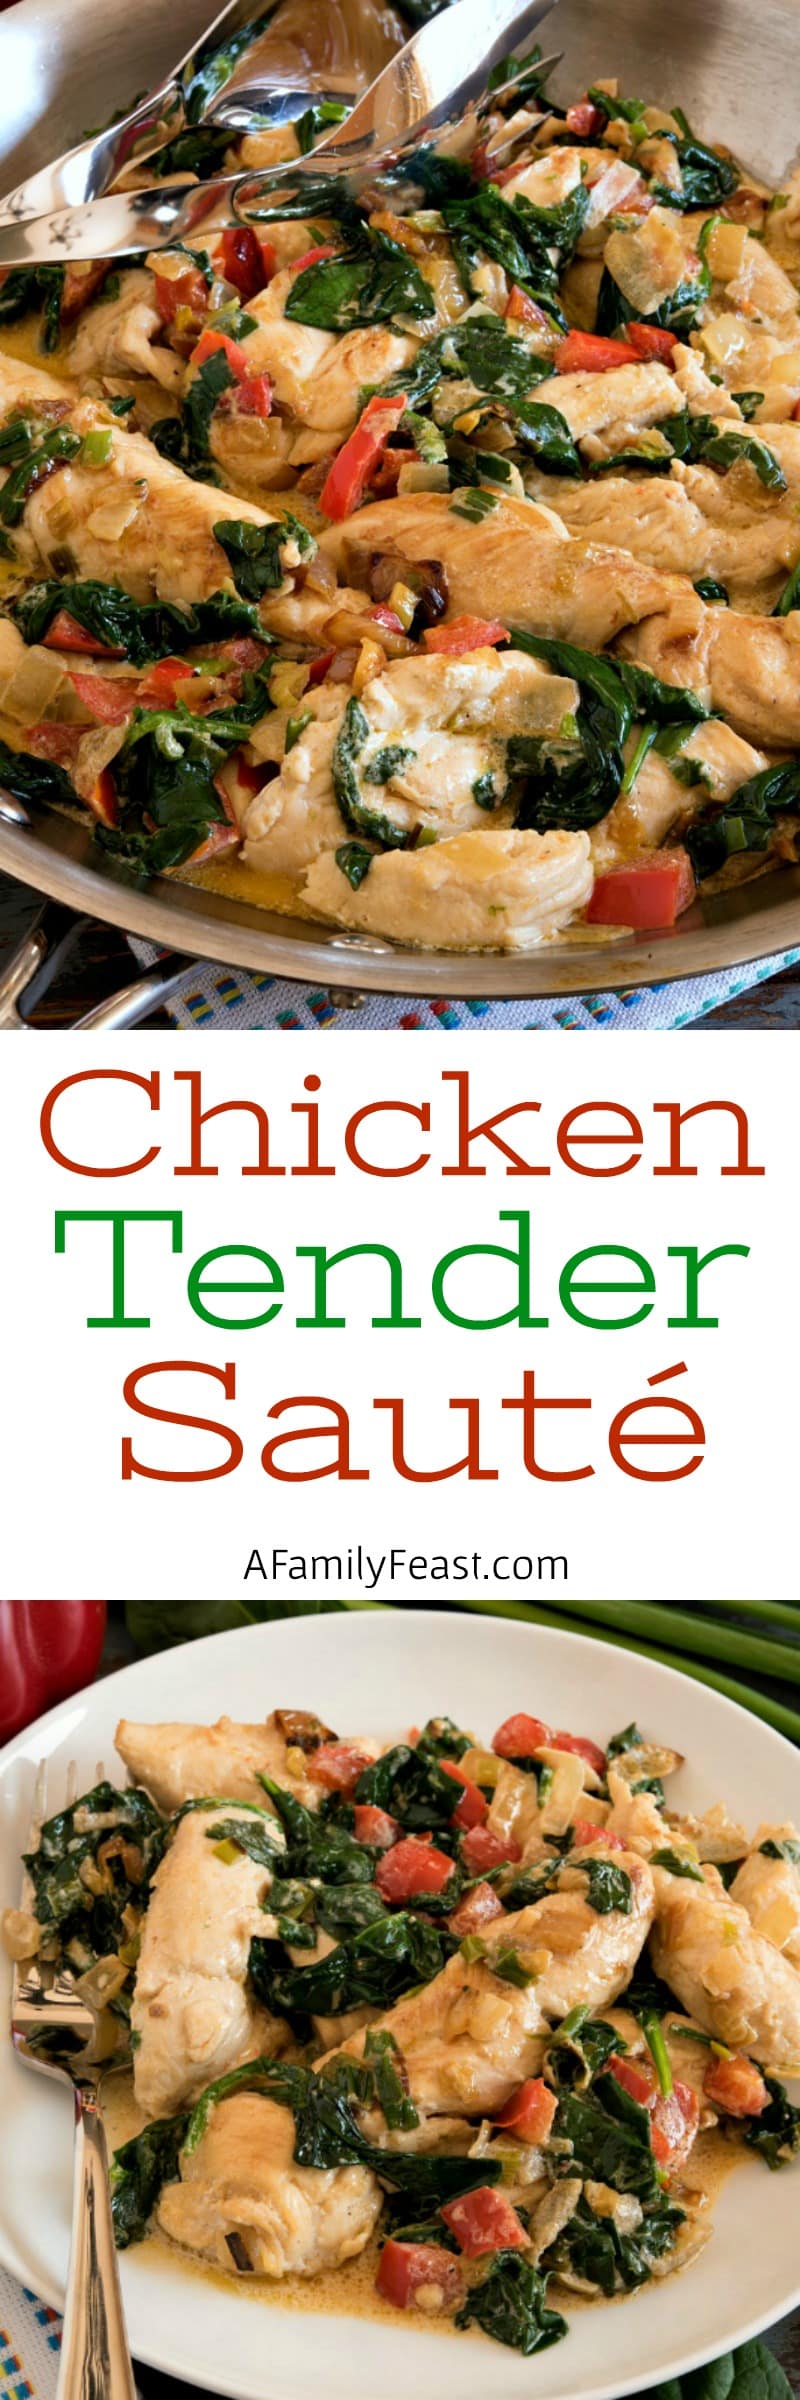 Chicken Tender Sauté - Tender strips of chicken with vegetables in a creamy sour cream sauce. Great for a keto or low carb diet.